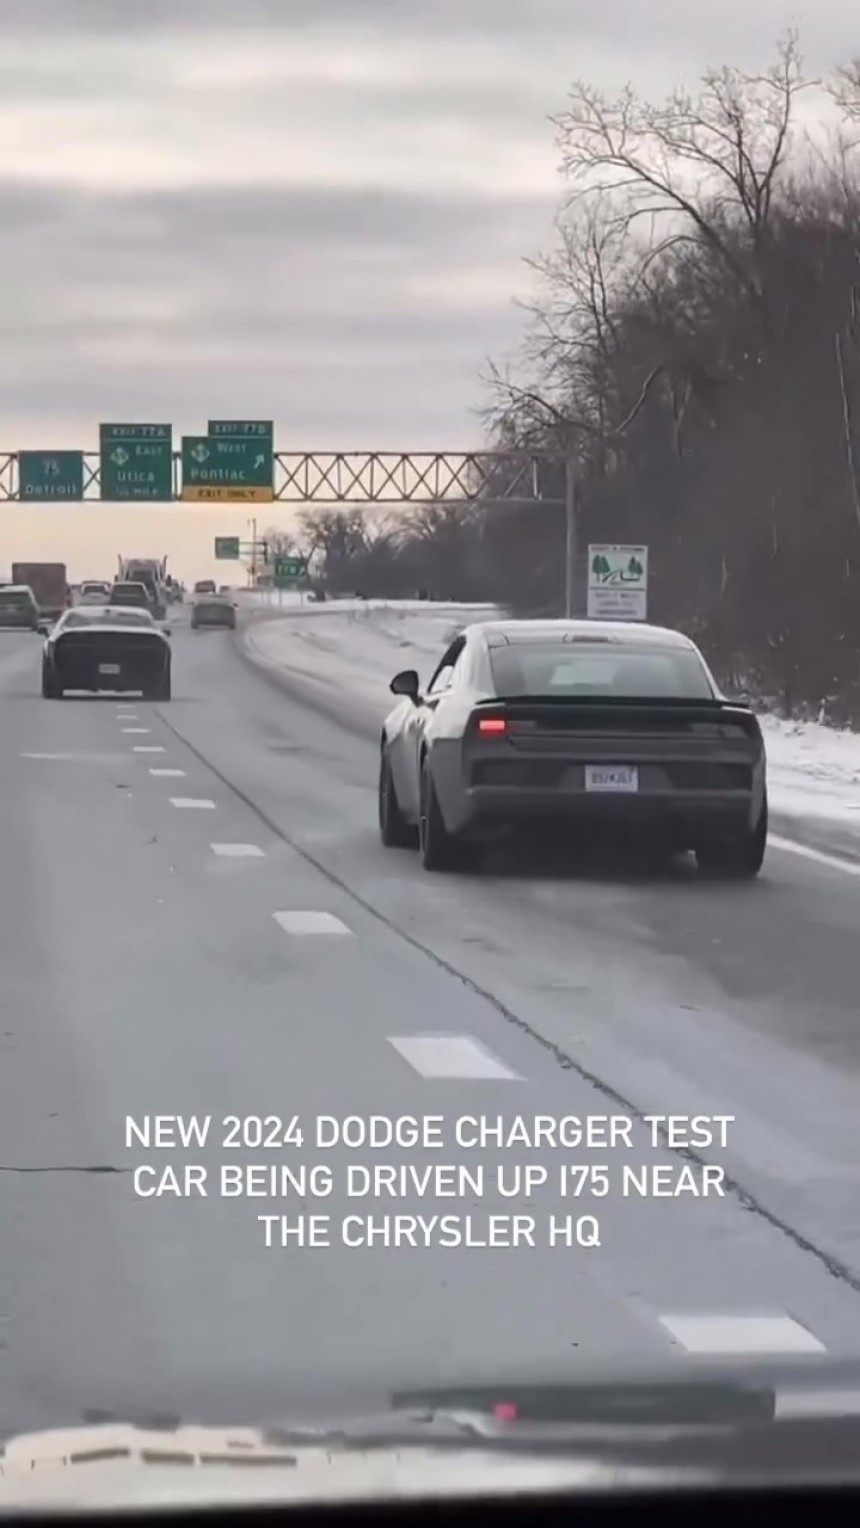 2025 Dodge Charger \- Spied